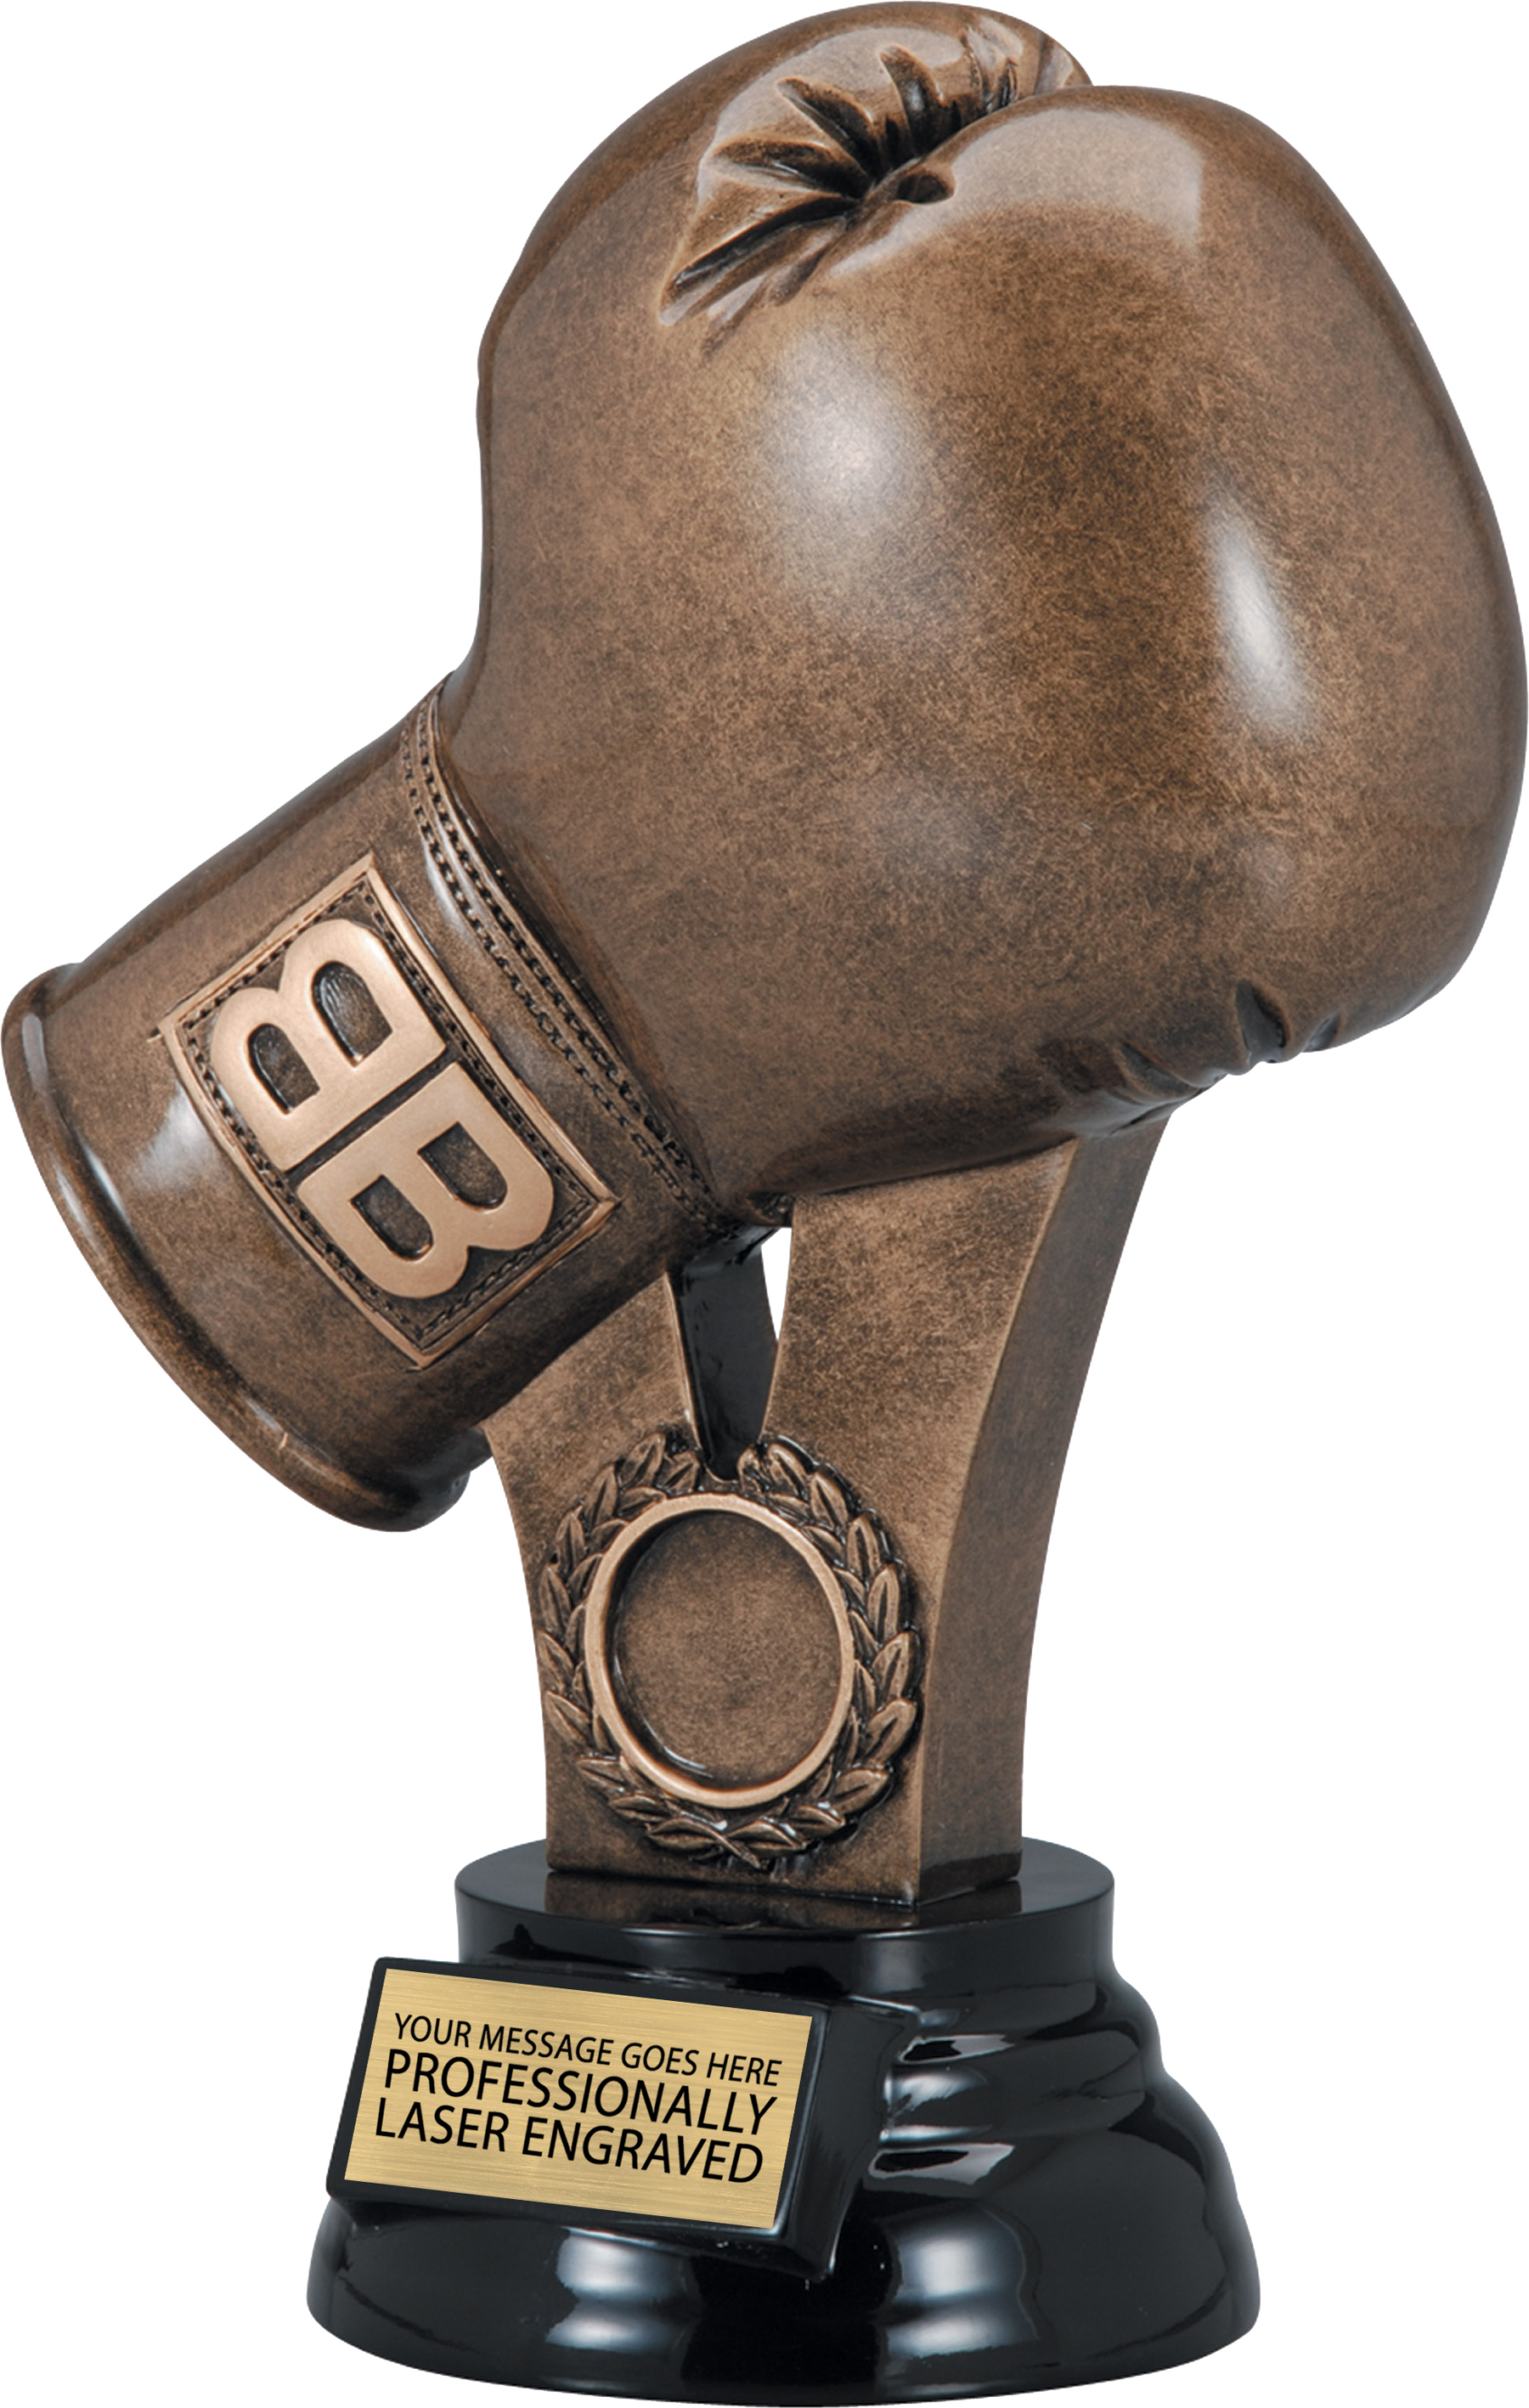 Boxing Glove Resin Trophy - 9 inch